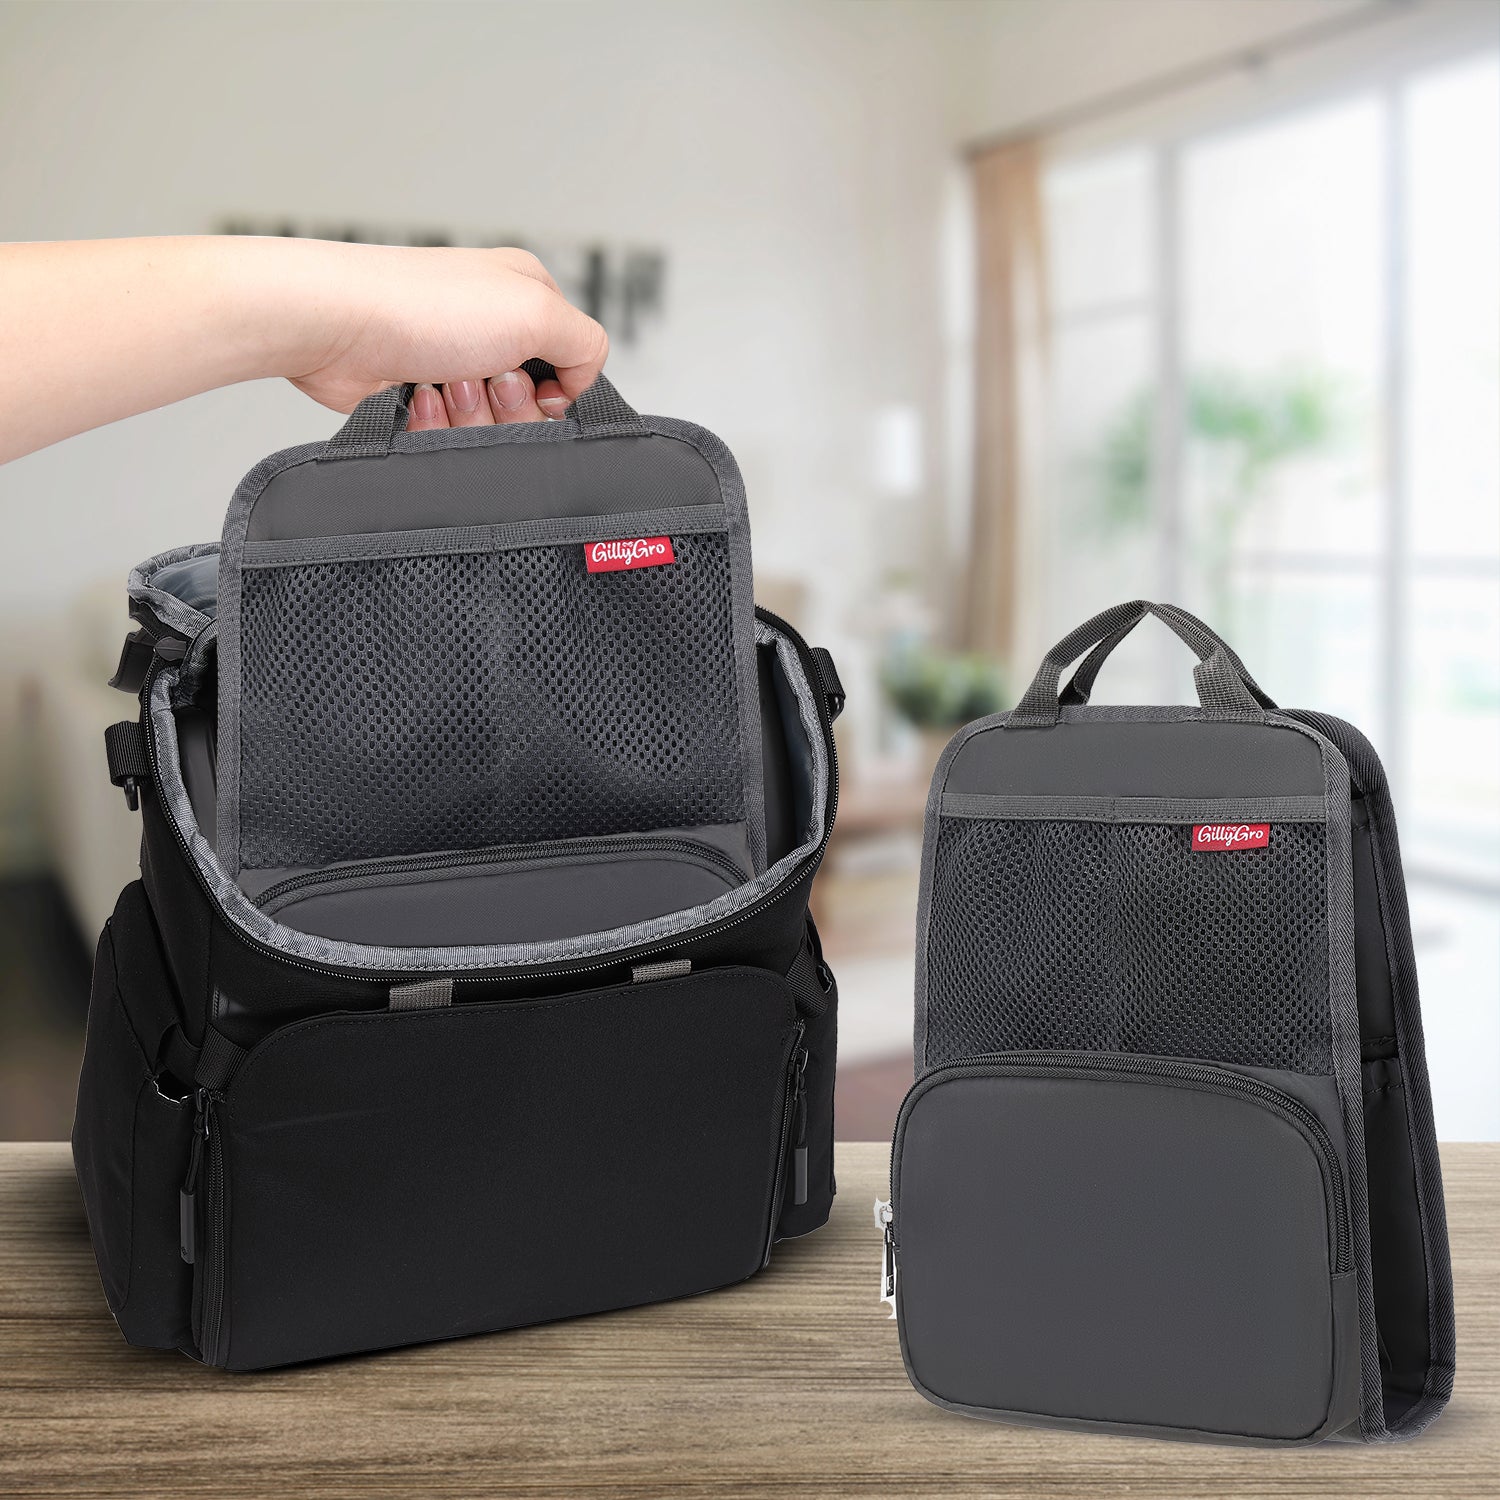 Stylish and Practical Diaper Bags for On-the-Go Parents – GillyGro